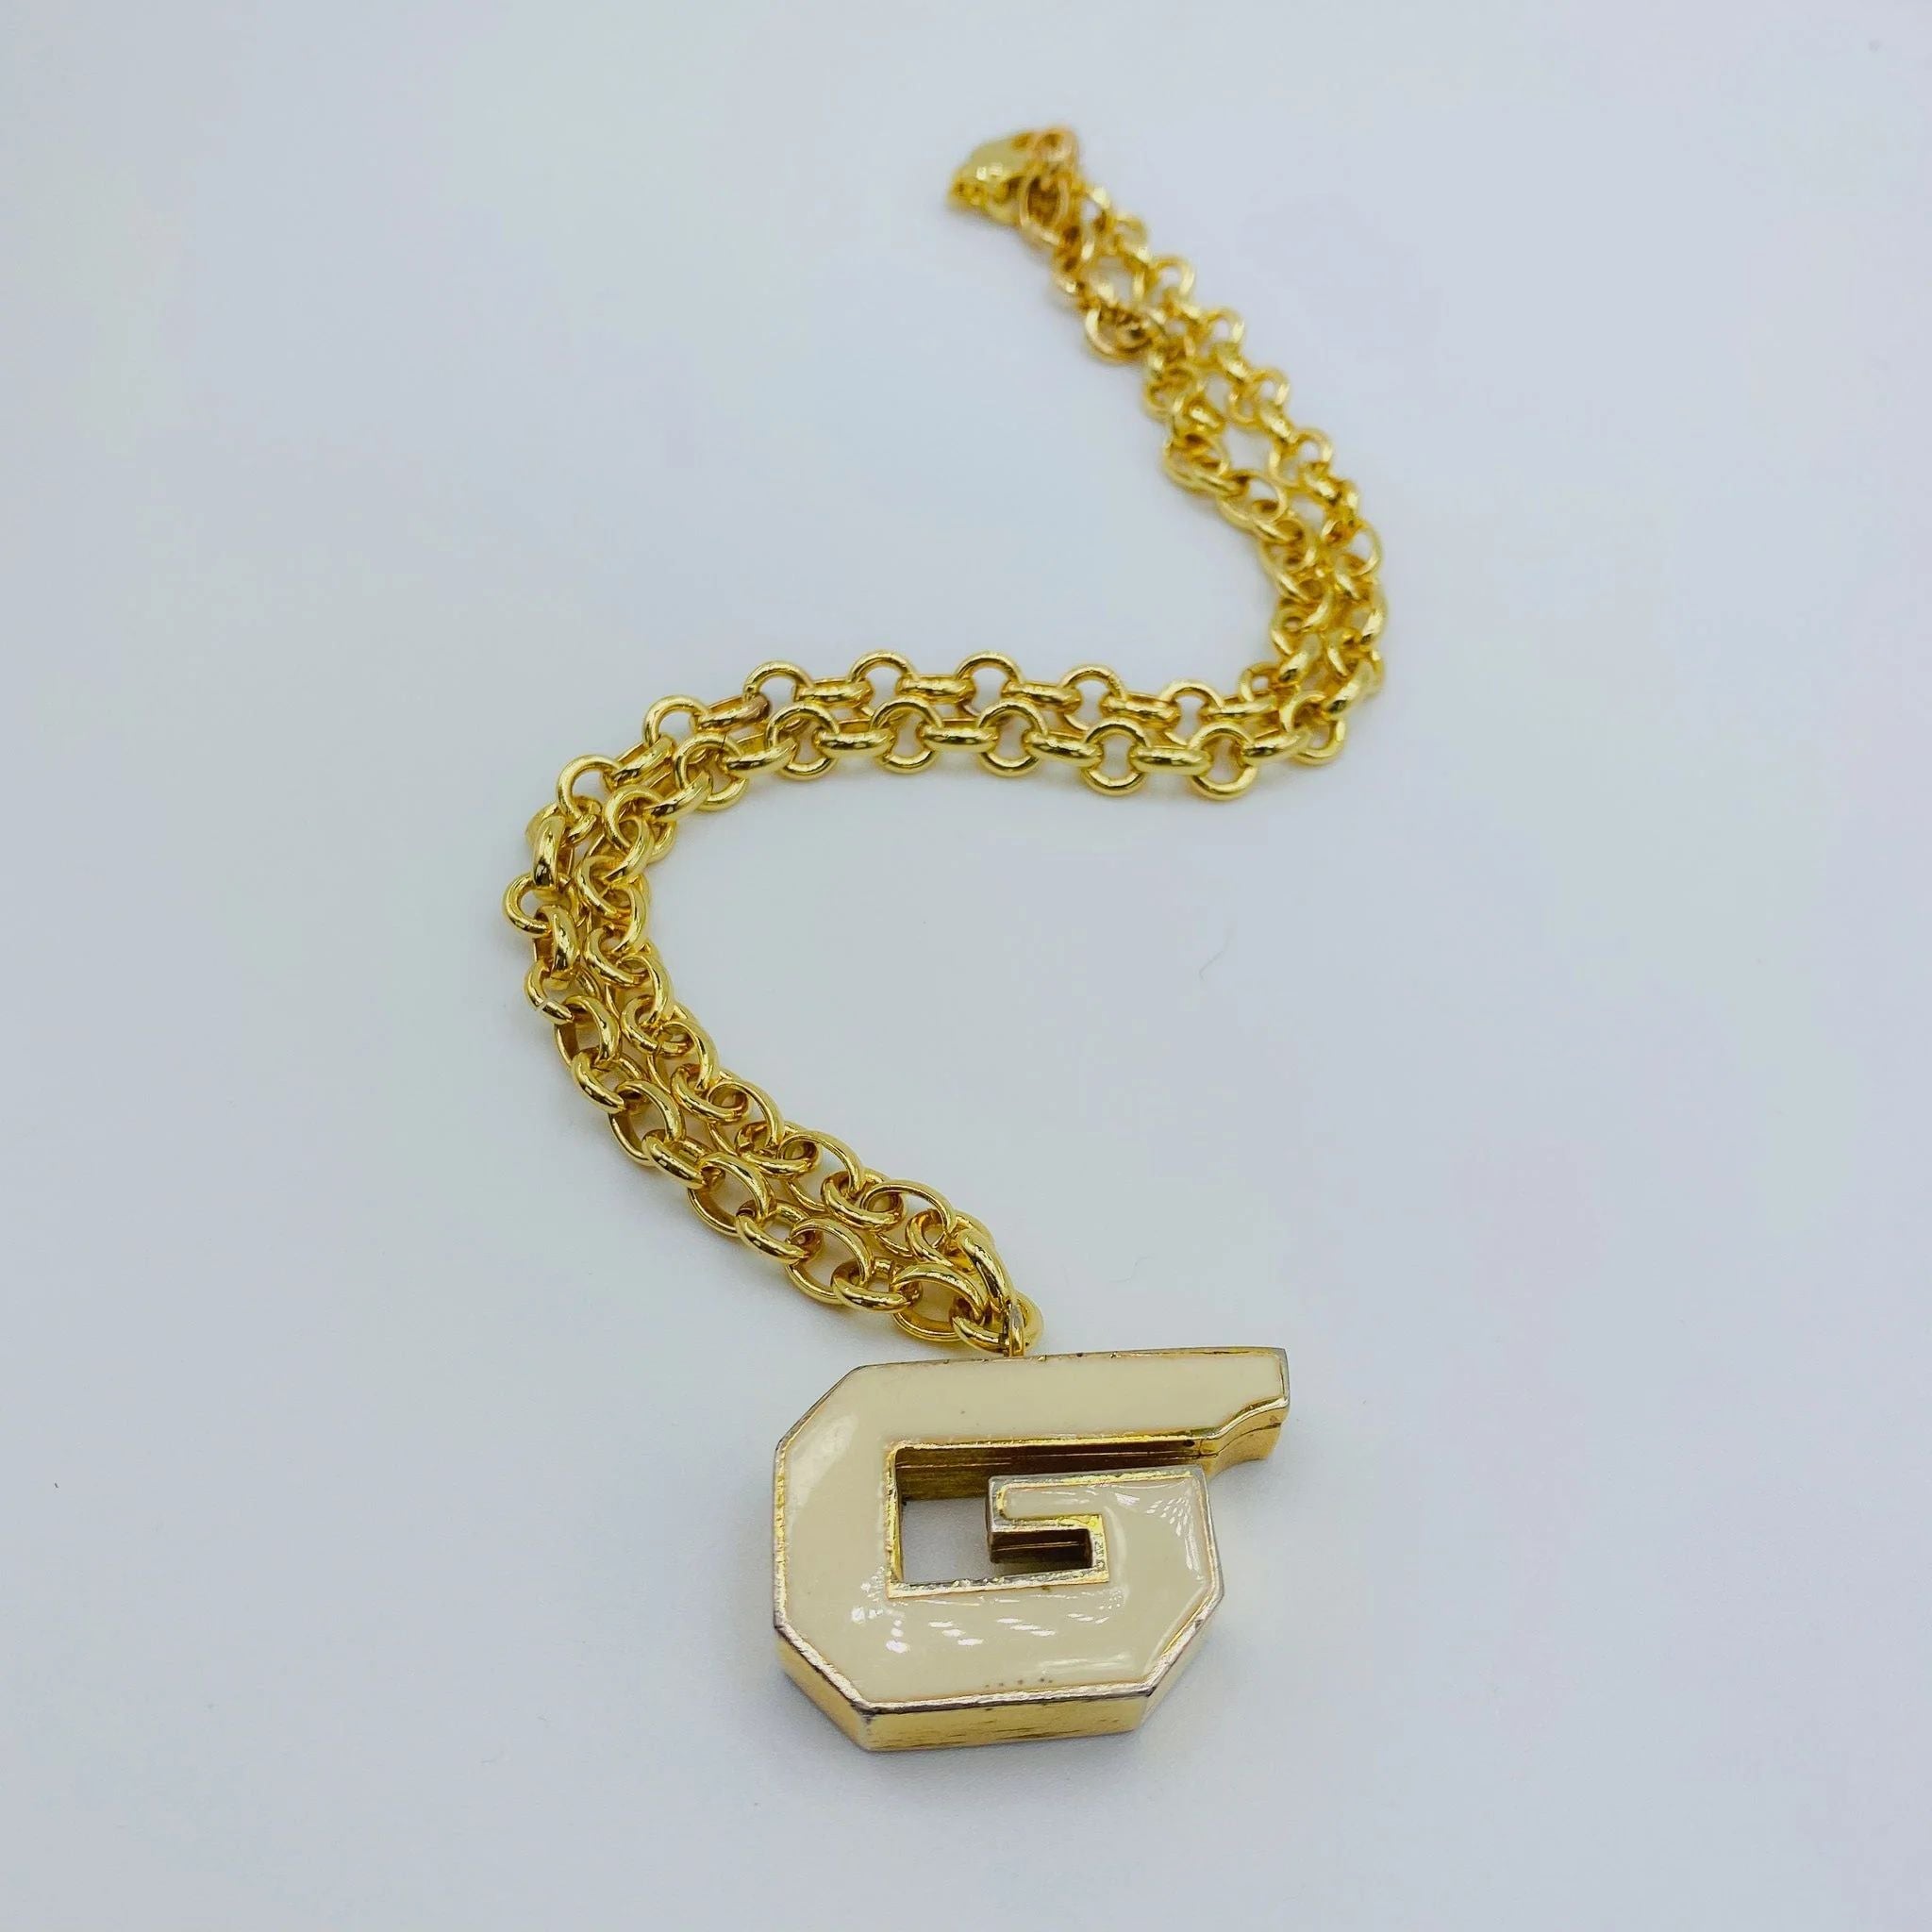 Re-engineered Vintage Givenchy Whistle Keychain 1970s - 1979 Collection For Sale